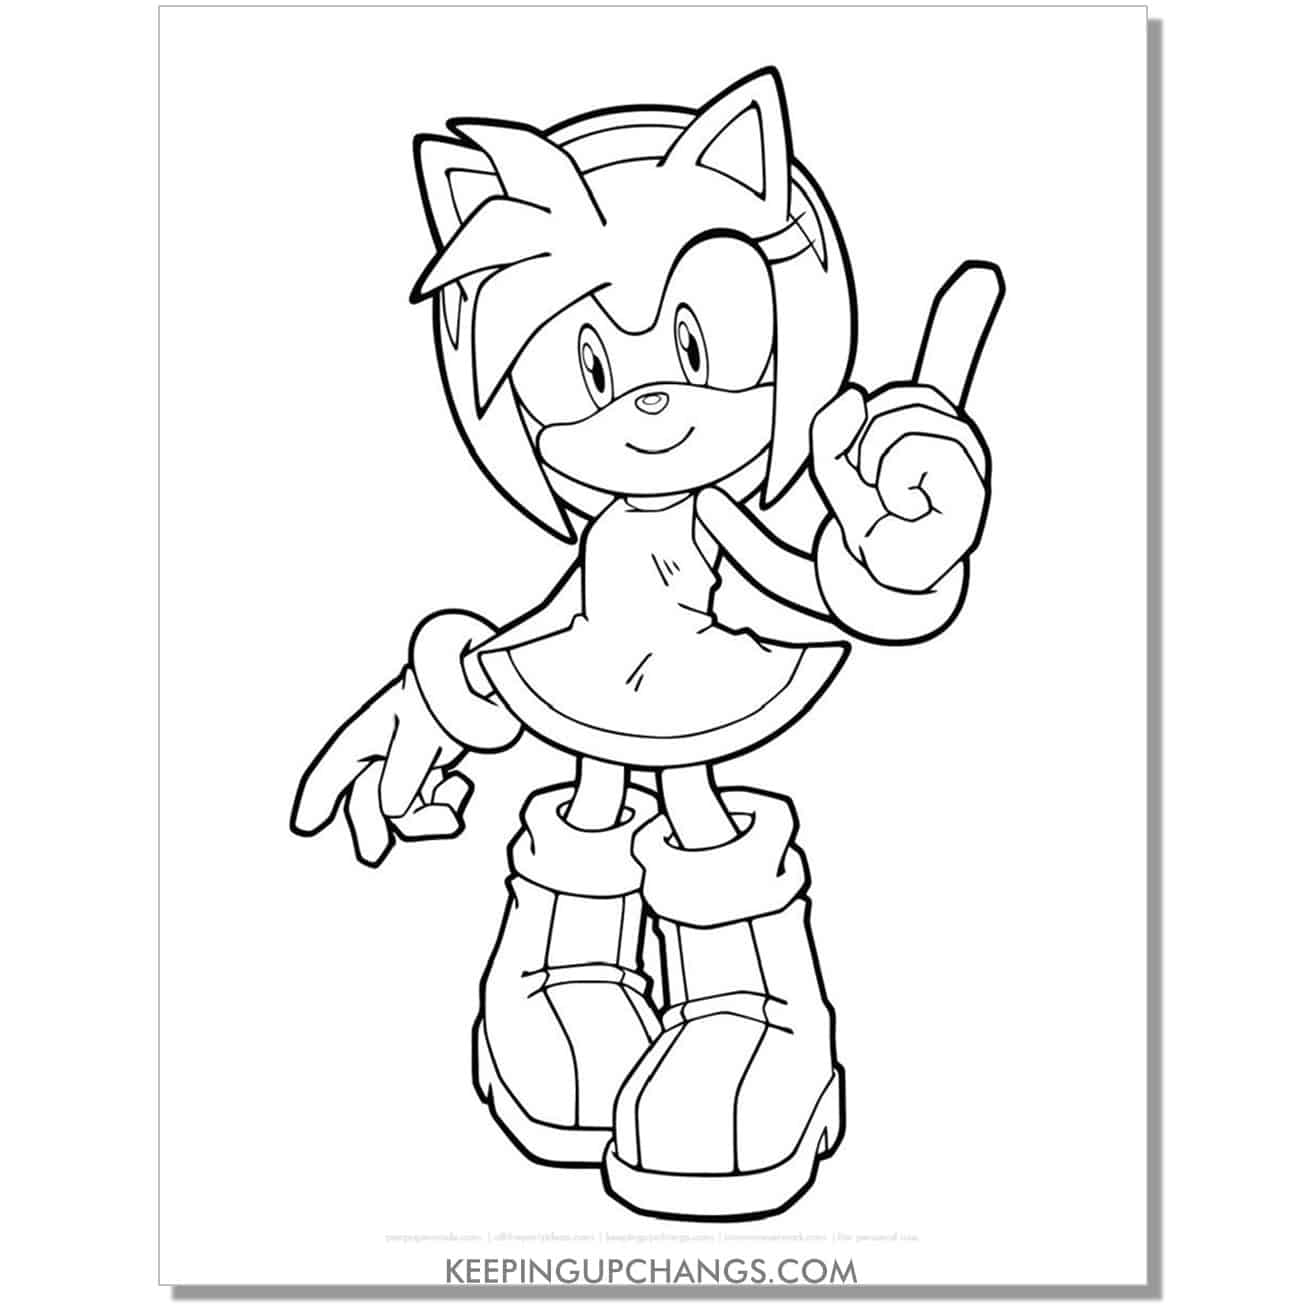 amy rose with finger pointing up sonic coloring page.